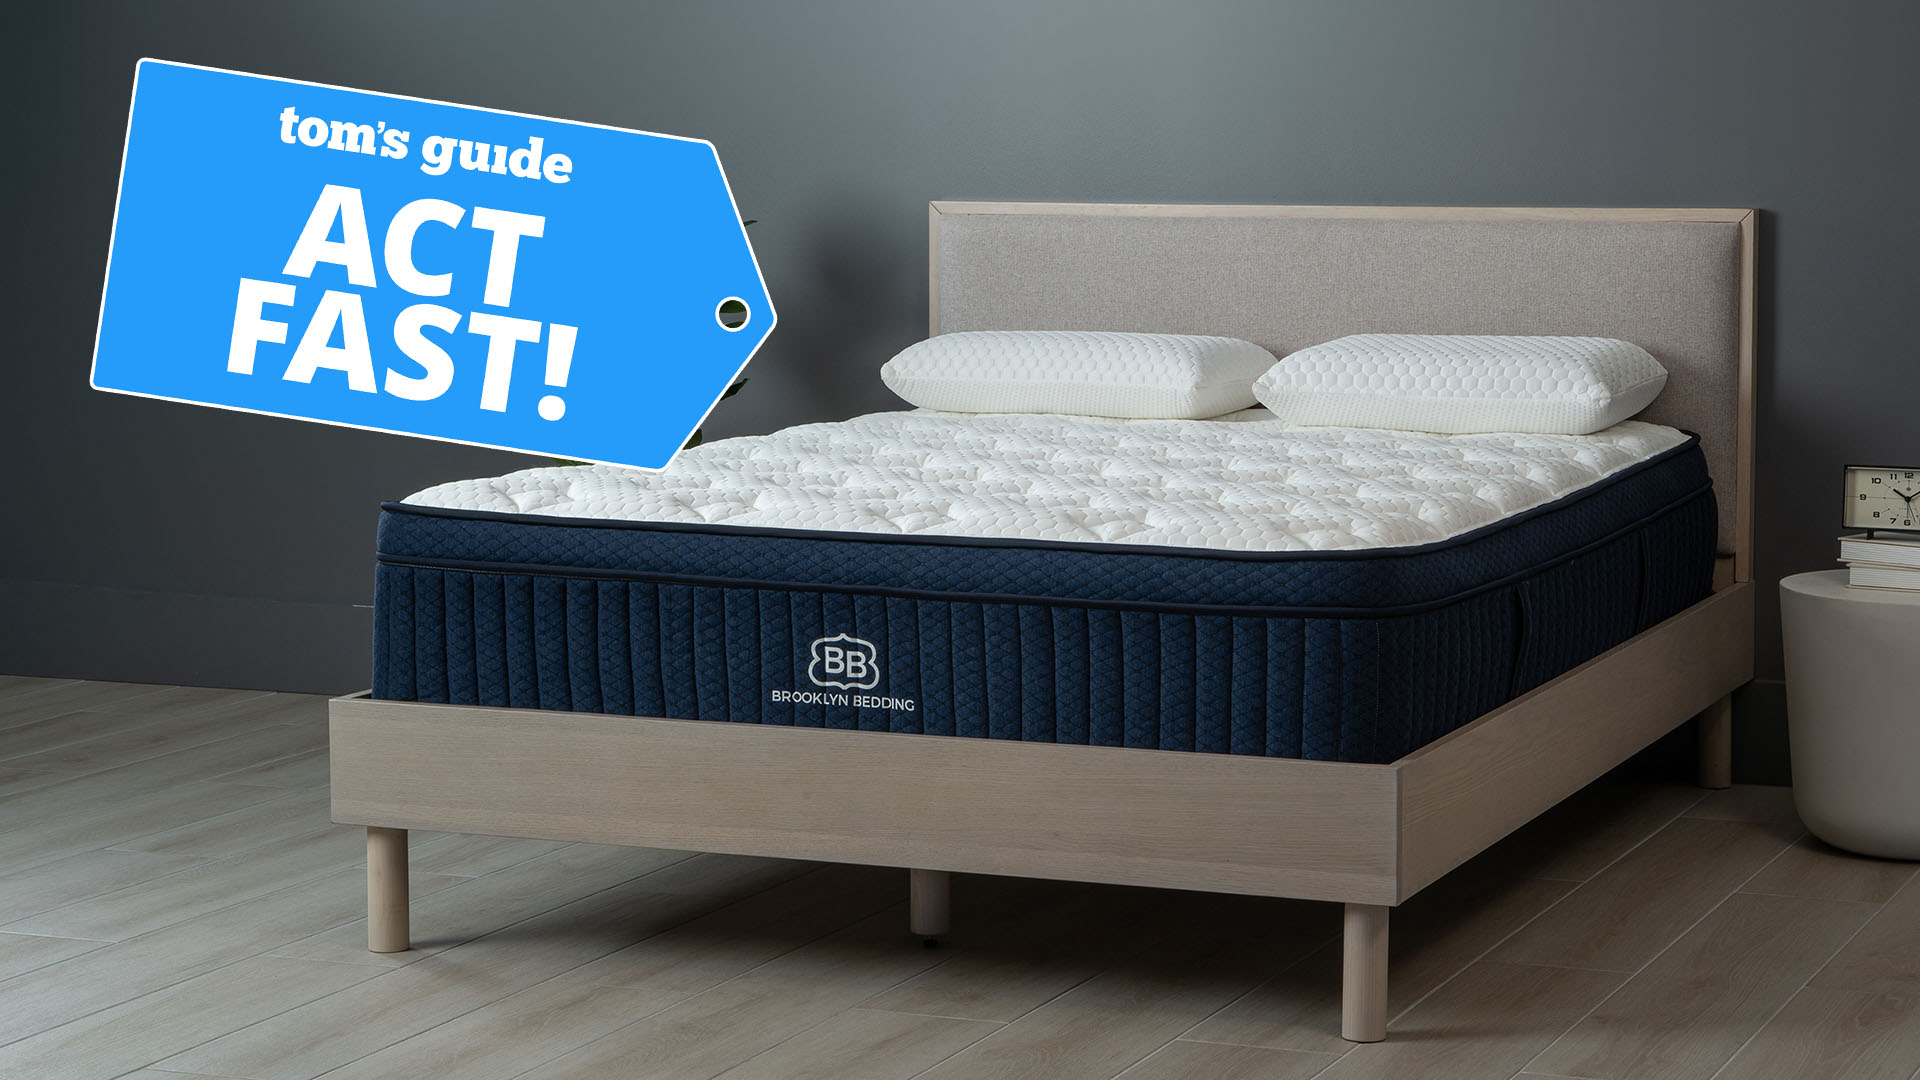 Save 25% on Brooklyn Bedding's best cooling mattress for hot sleepers